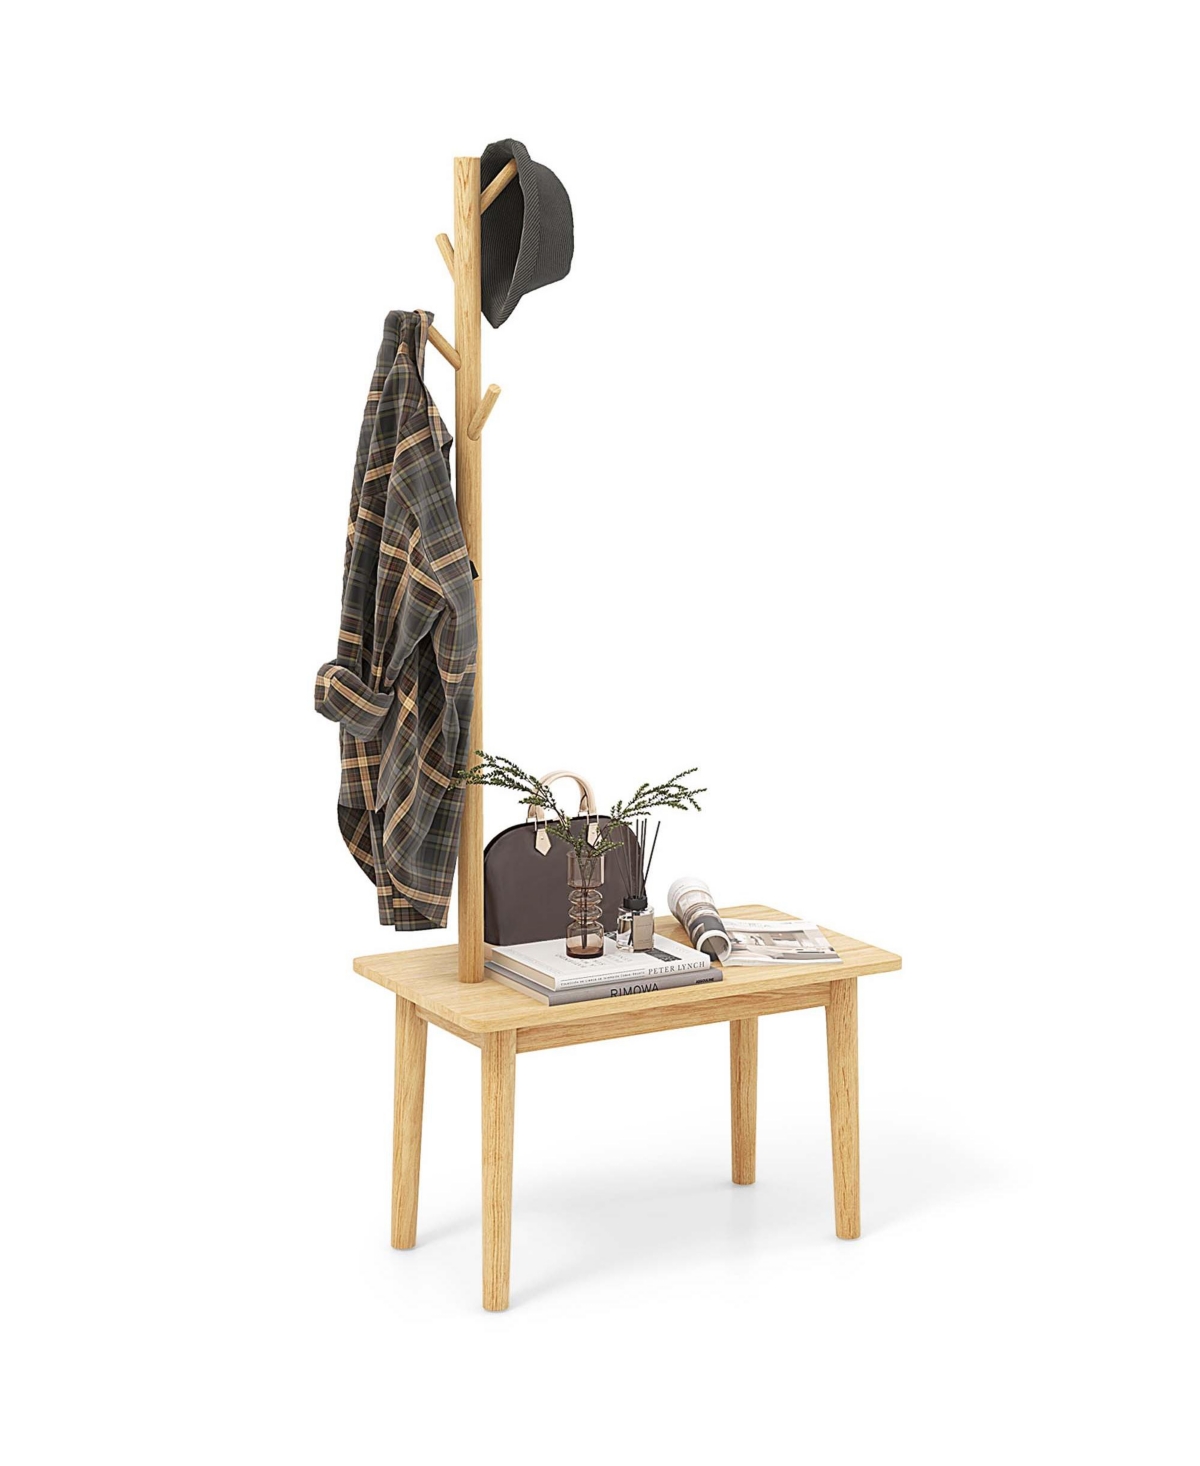 End Table with Coat Rack 2-in-1 Side Table 3 Hooks for Hats Bags Coats Freestanding - Natural